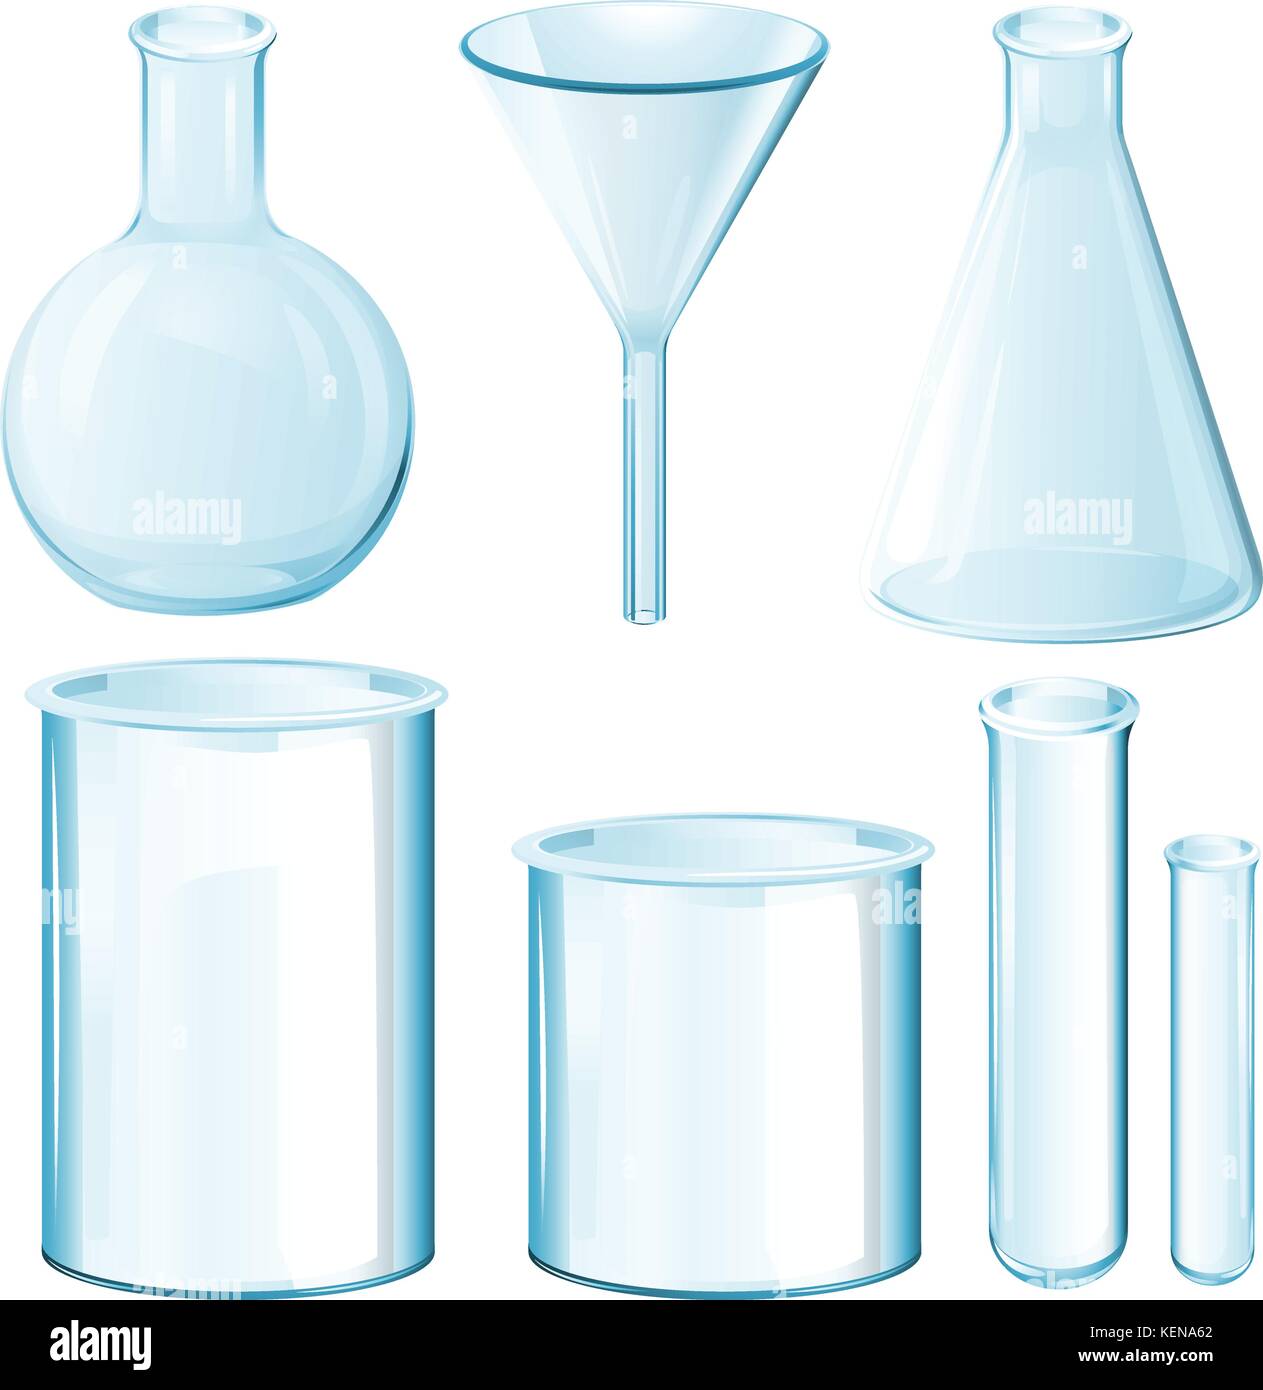 Illustration of chemical science equipments Stock Vector